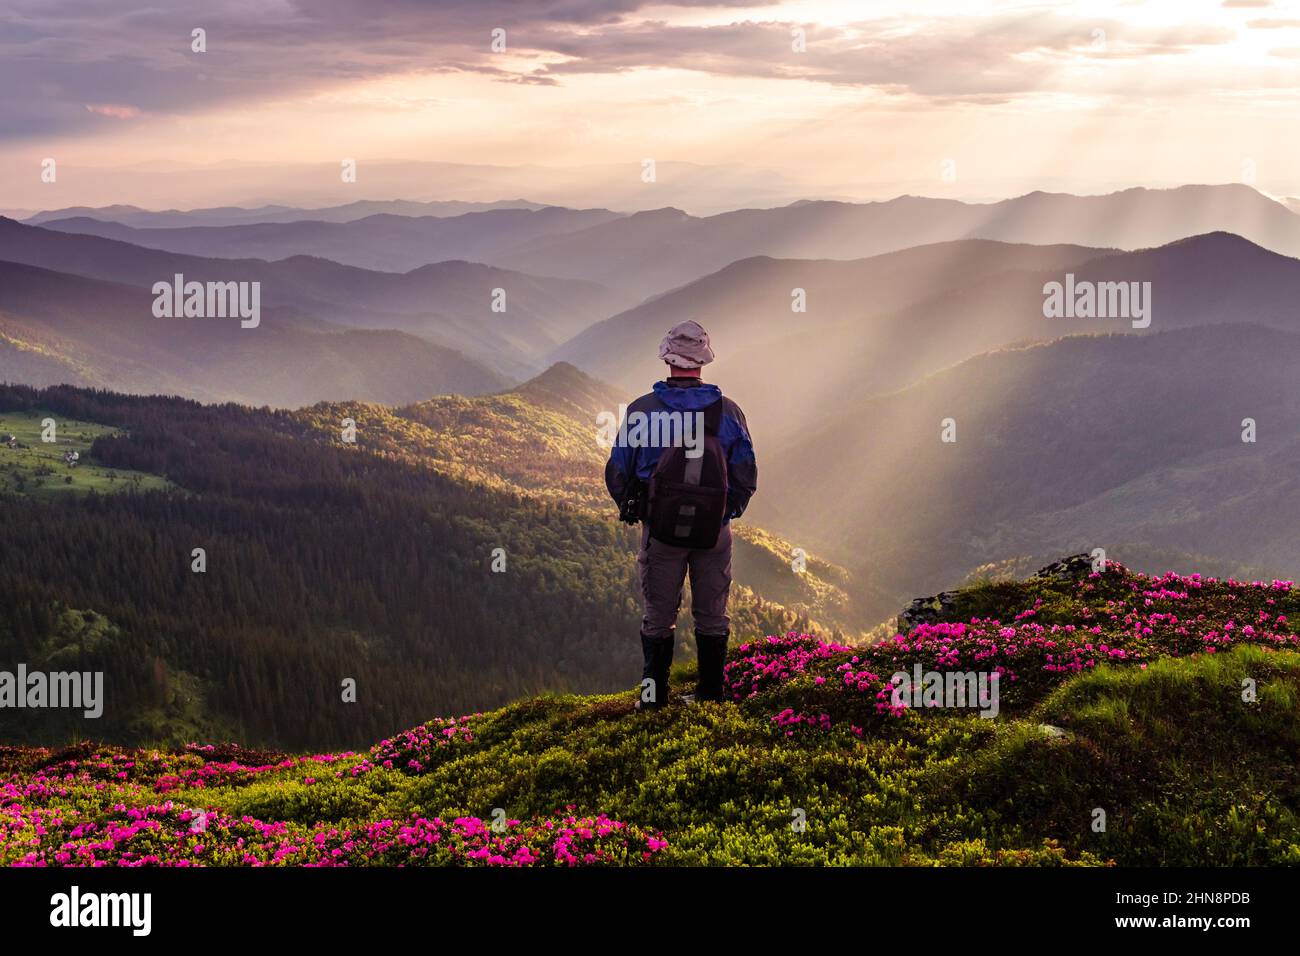 Photographer on mountains meadow covered by rhododendron flowers in summer time. Purple sunrise light glowing on a foreground. Landscape photography Stock Photo